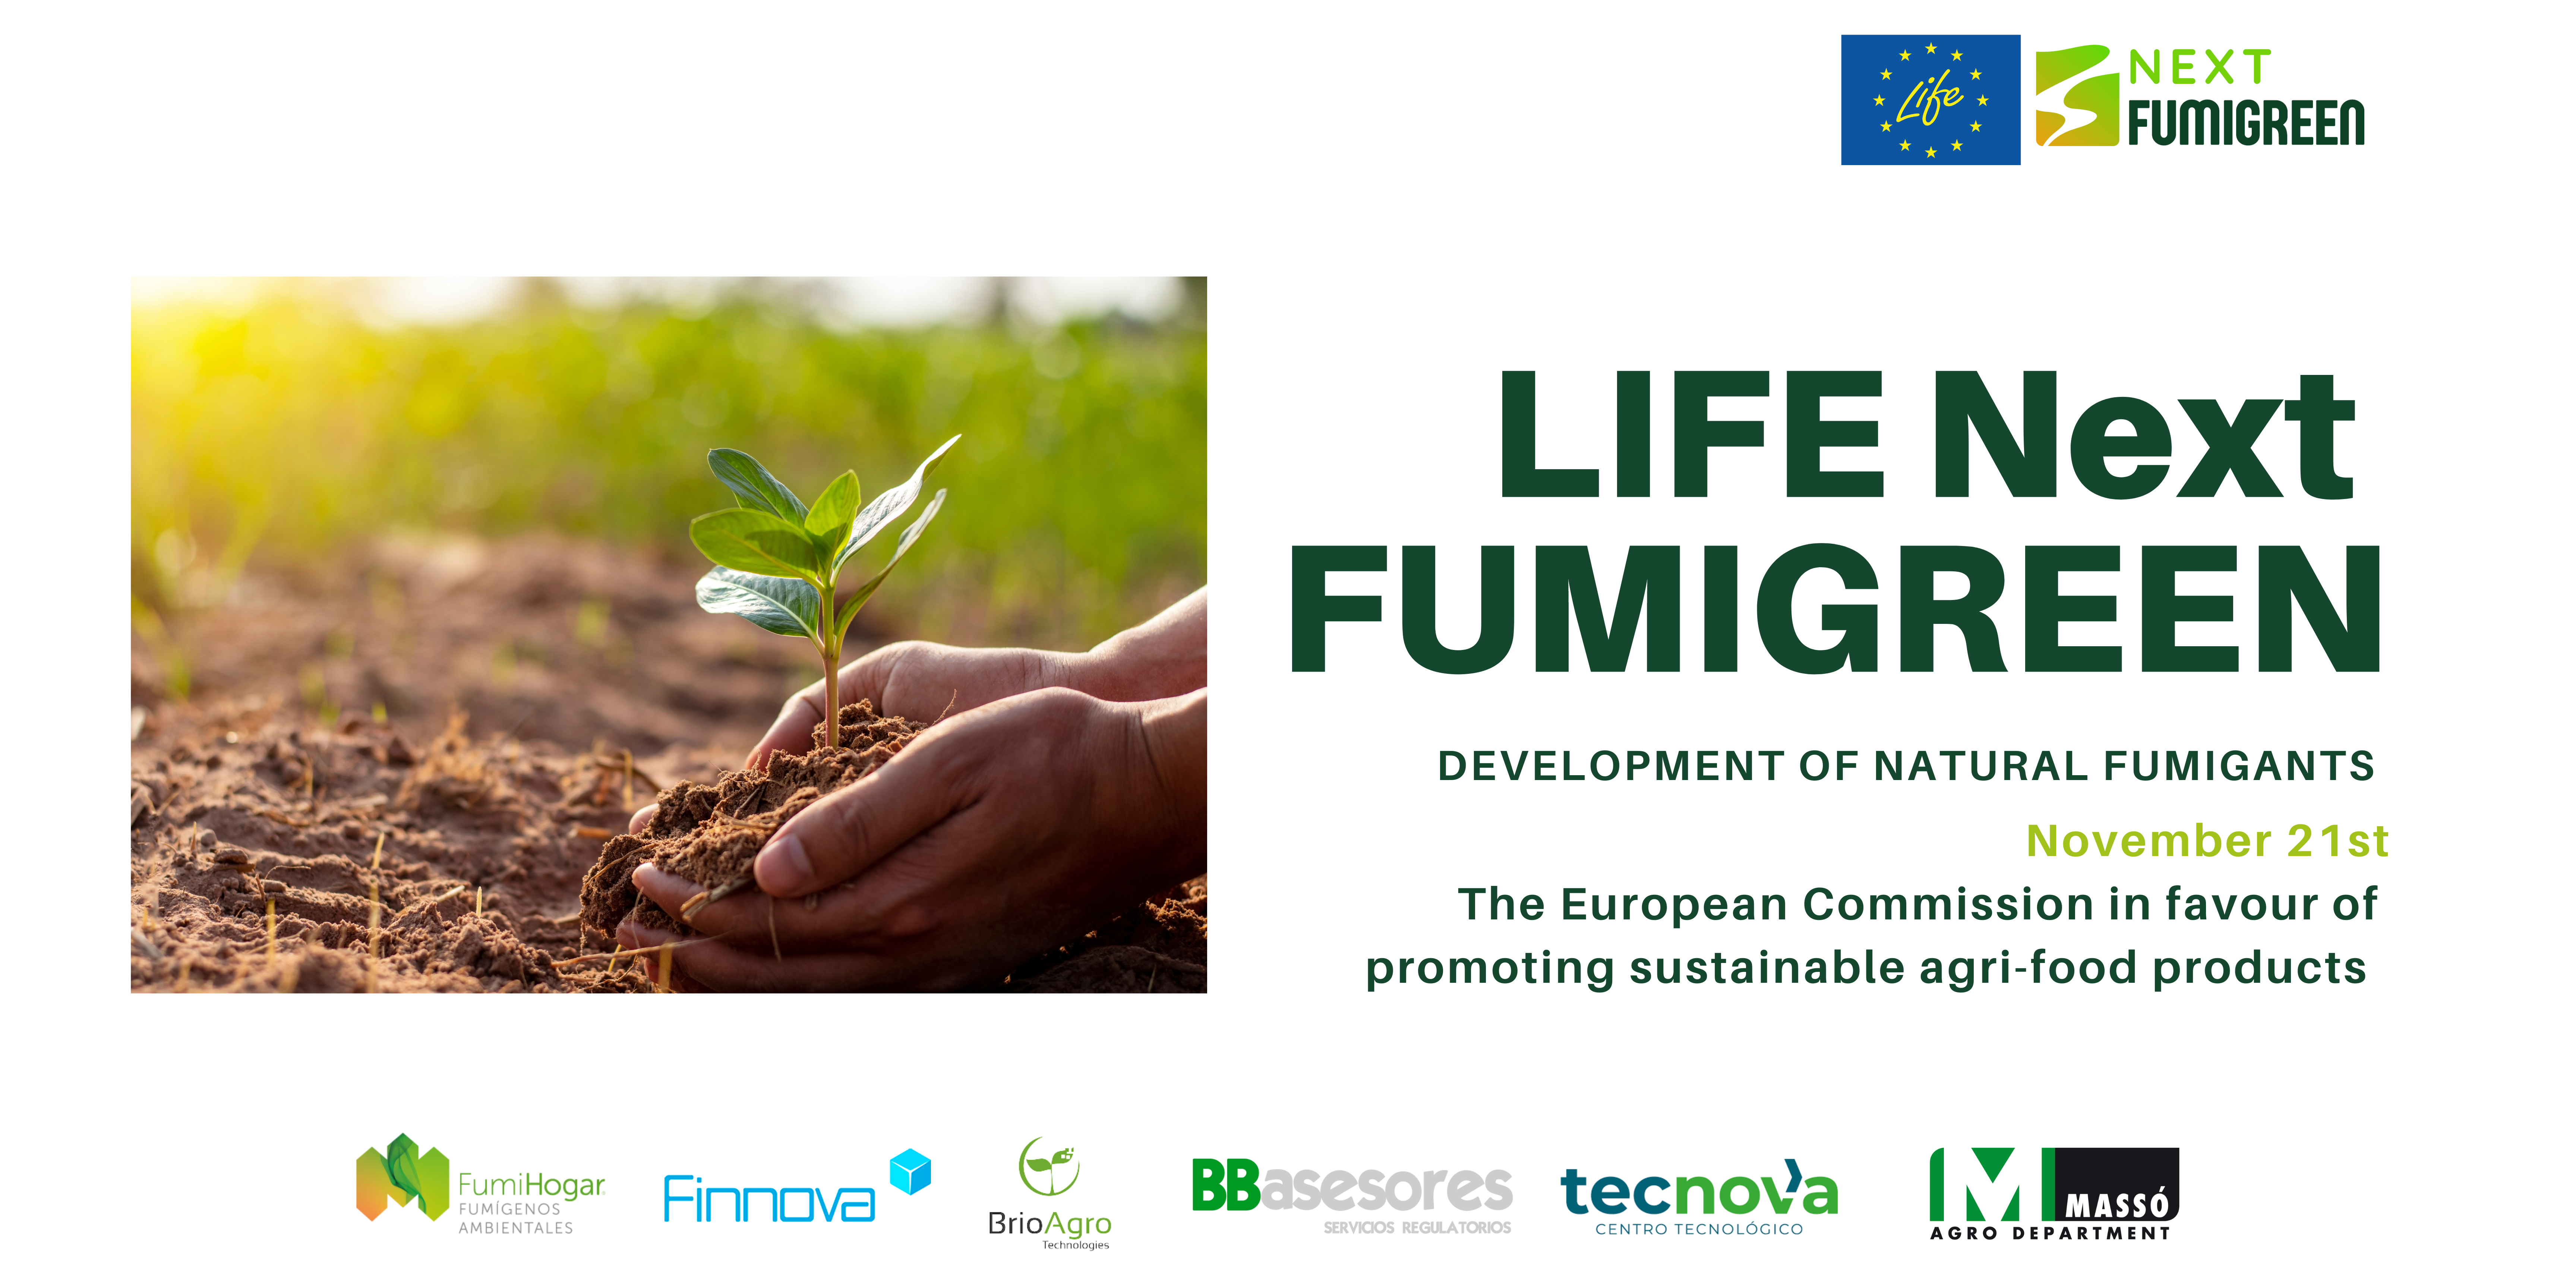 LIFE NextFUMIGREEN aligns with the European Commission’s initiative promoting sustainable agri-food products within and outside the EU by 2024